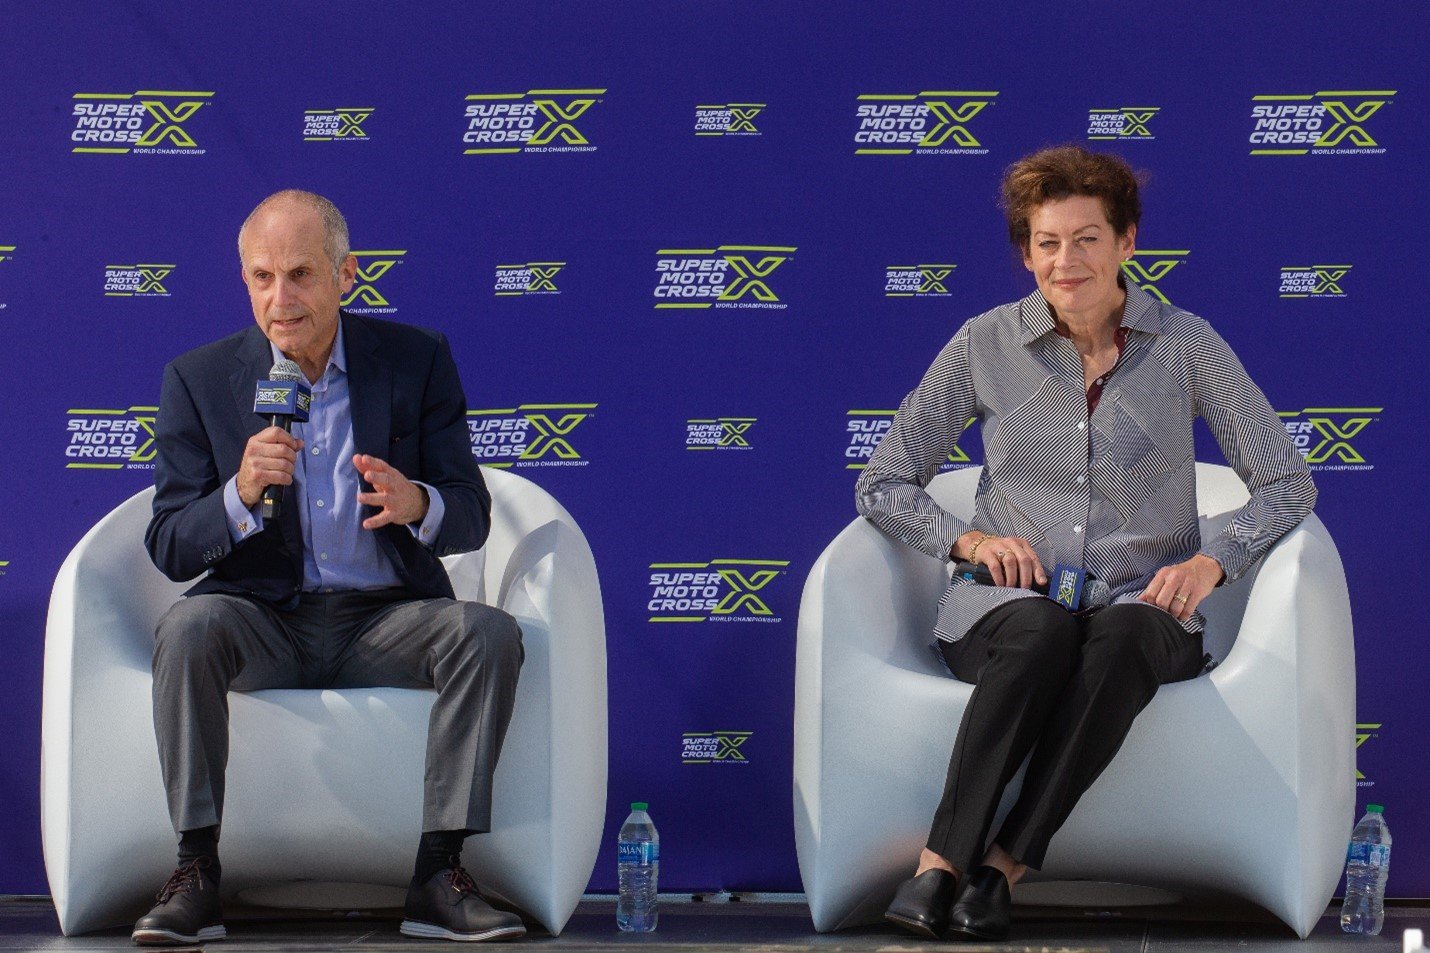 Kenneth Feld, Chair and CEO, Feld Entertainment, Inc., and Carrie Coombs-Russell, CEO MX Sports Pro Racing, speaking at the SuperMotocross World Championship press event at the Los Angeles Memorial Coliseum in Los Angeles. Photo Credit: Feld Motor Sports